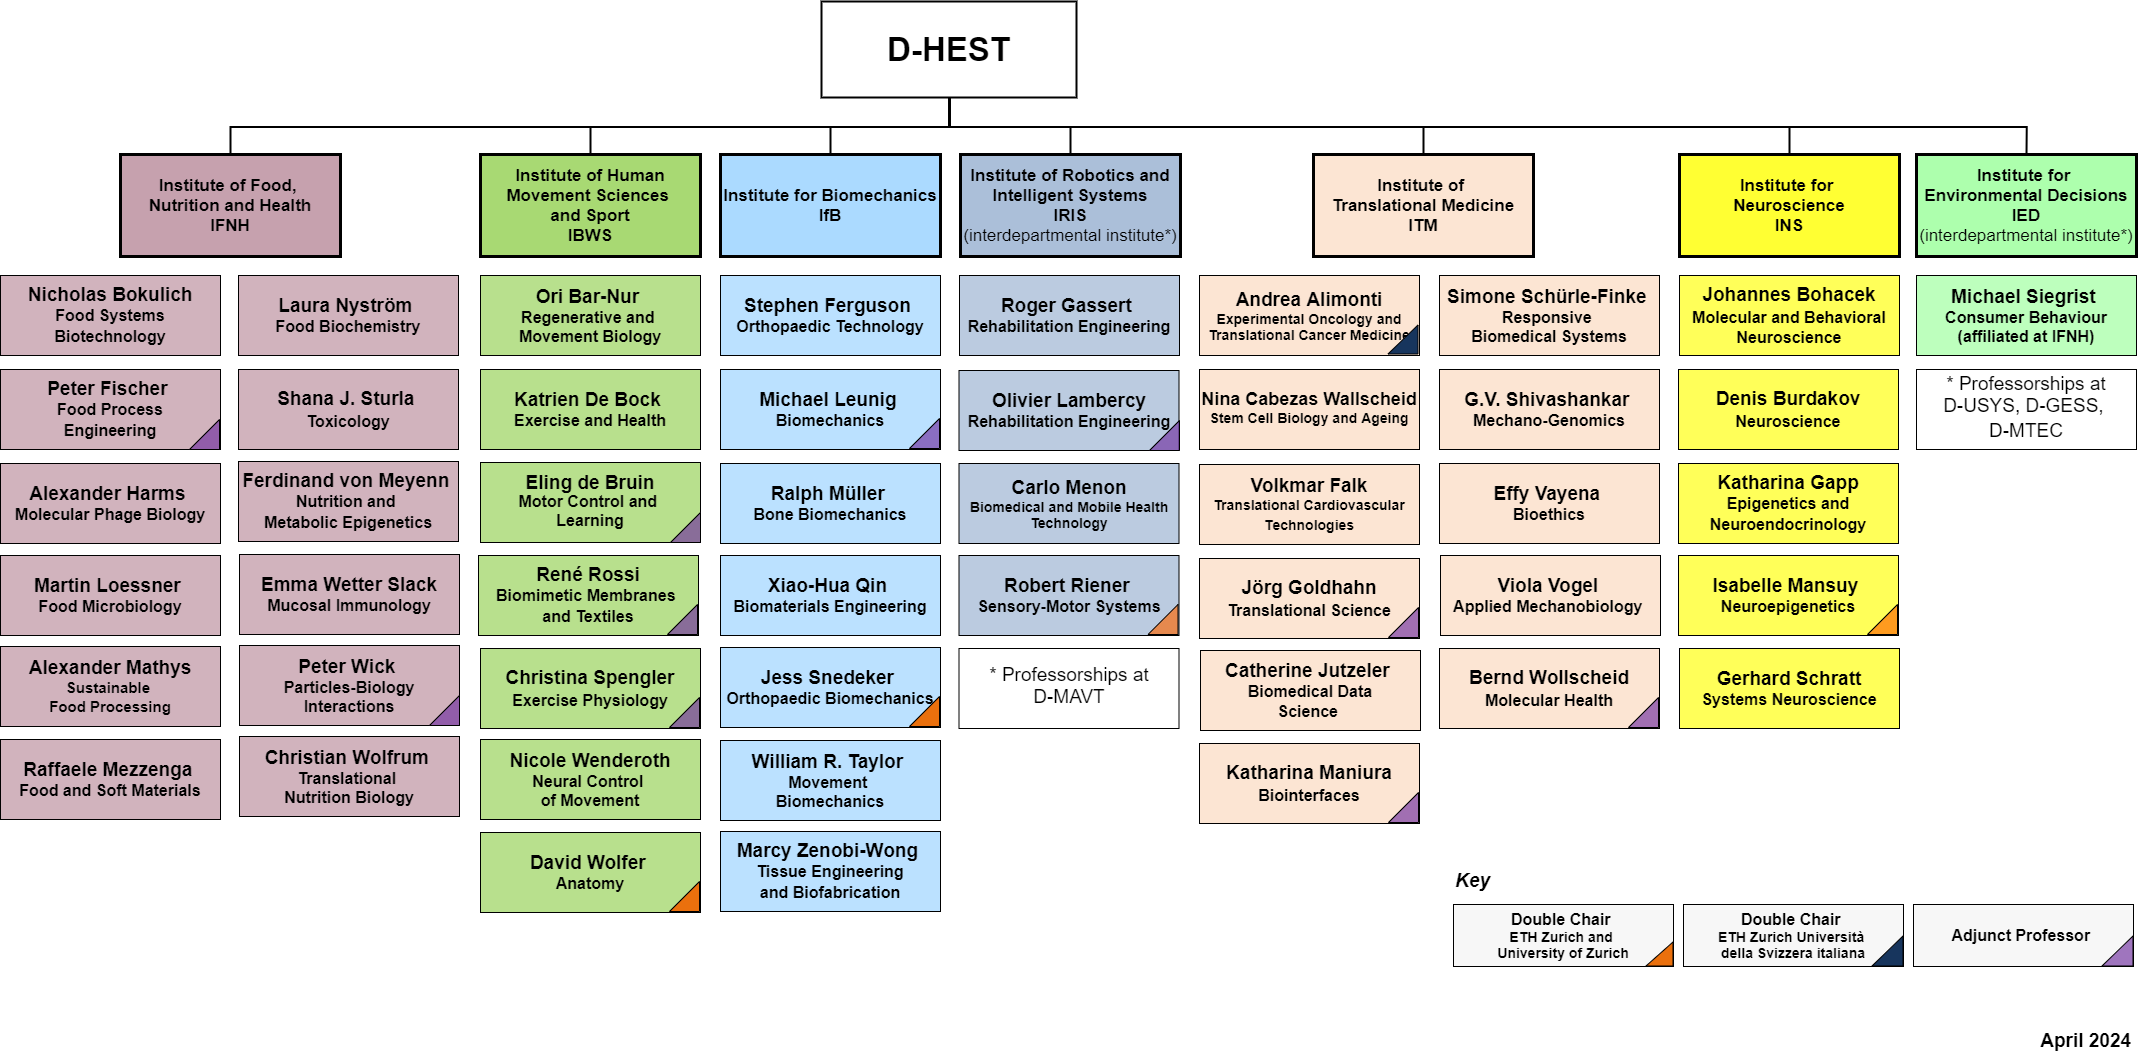 Enlarged view: Organisation Chart D-HEST